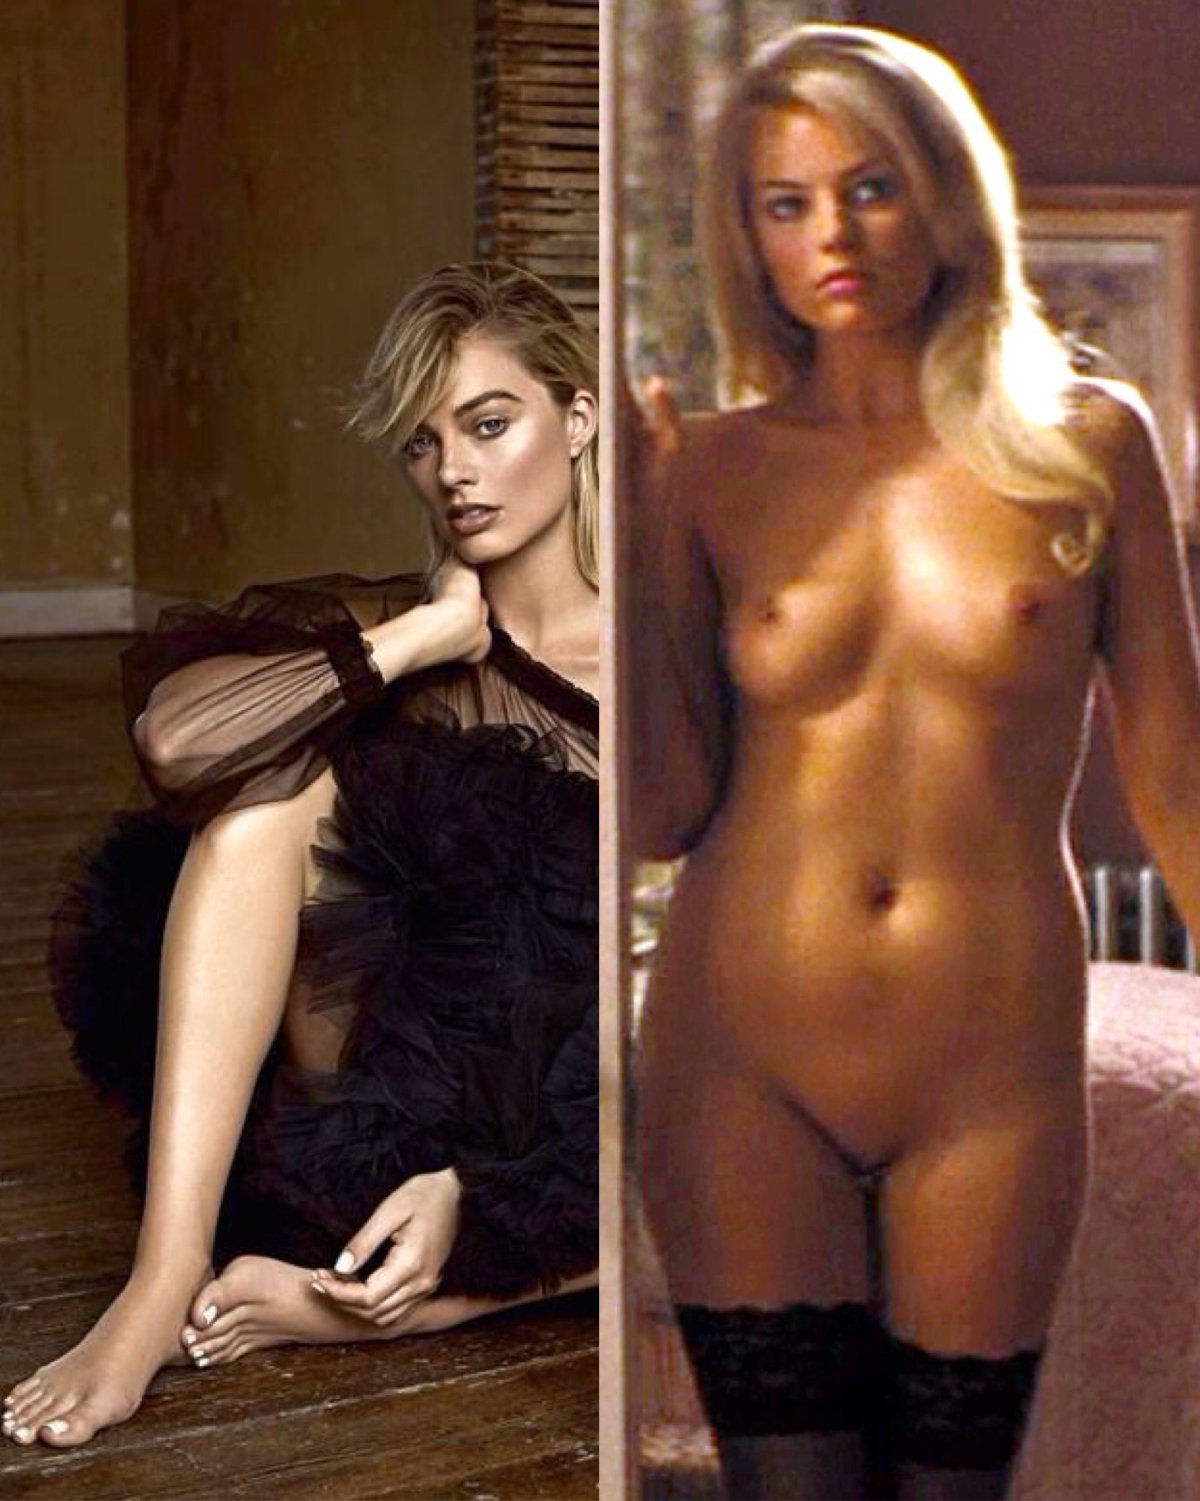 andrea brennen share margot robbie naked pussy photos